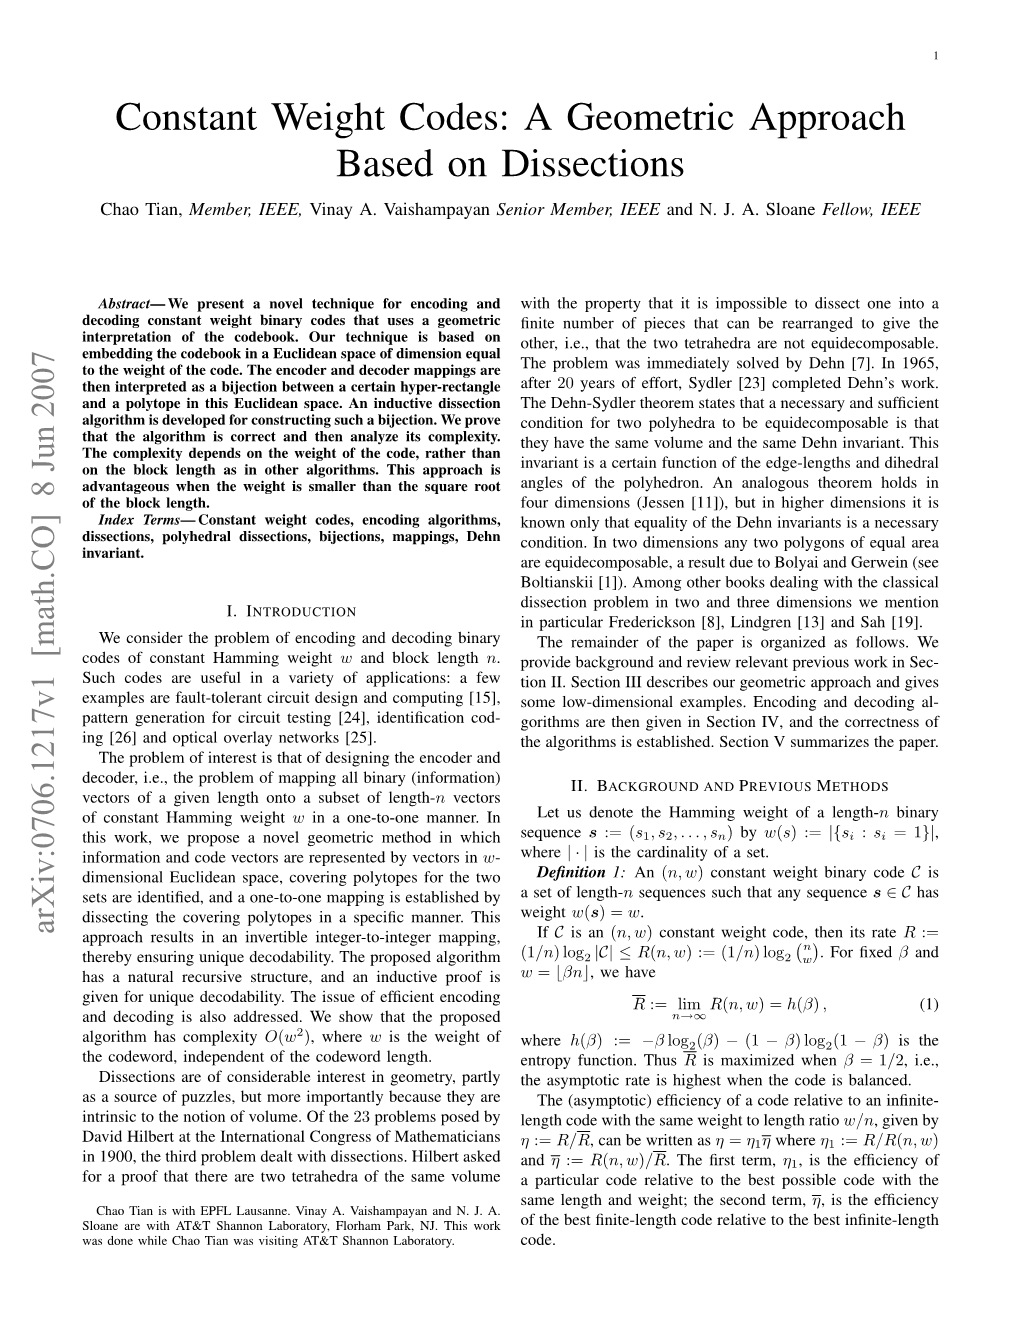 Constant Weight Codes: a Geometric Approach Based on Dissections Chao Tian, Member, IEEE, Vinay A